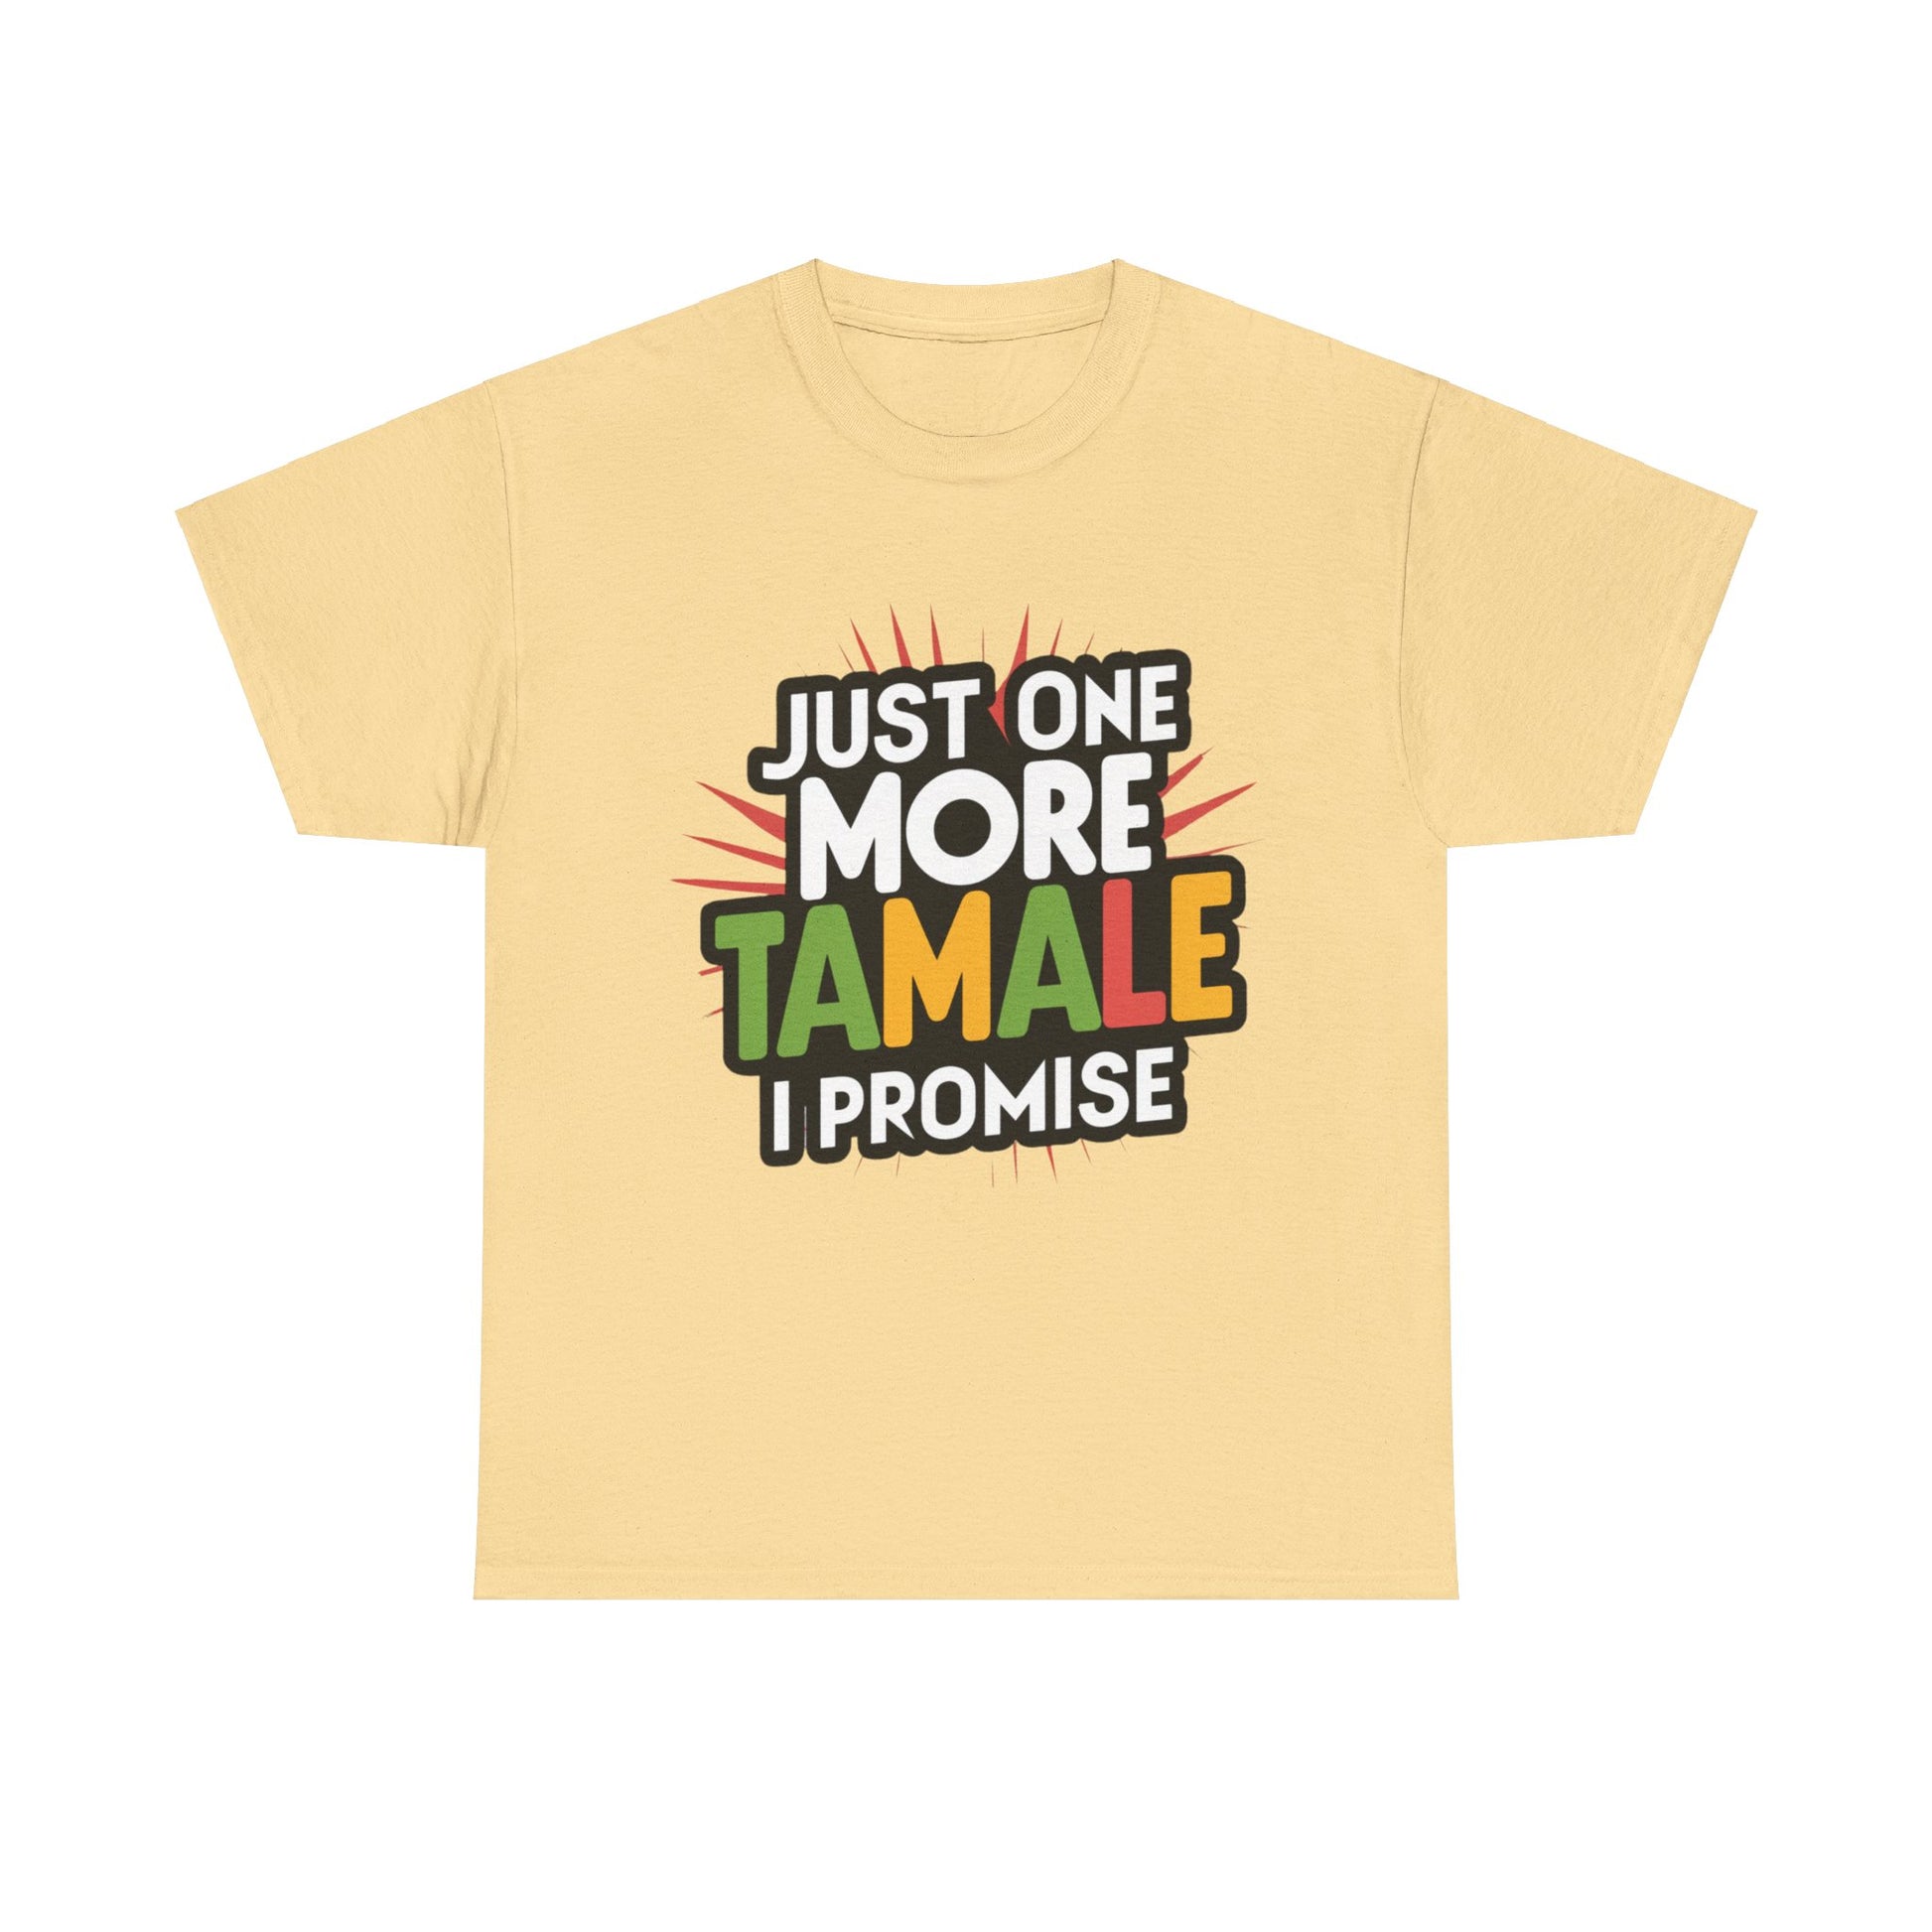 Just One More Tamale I Promise Mexican Food Graphic Unisex Heavy Cotton Tee Cotton Funny Humorous Graphic Soft Premium Unisex Men Women Yellow Haze T-shirt Birthday Gift-11